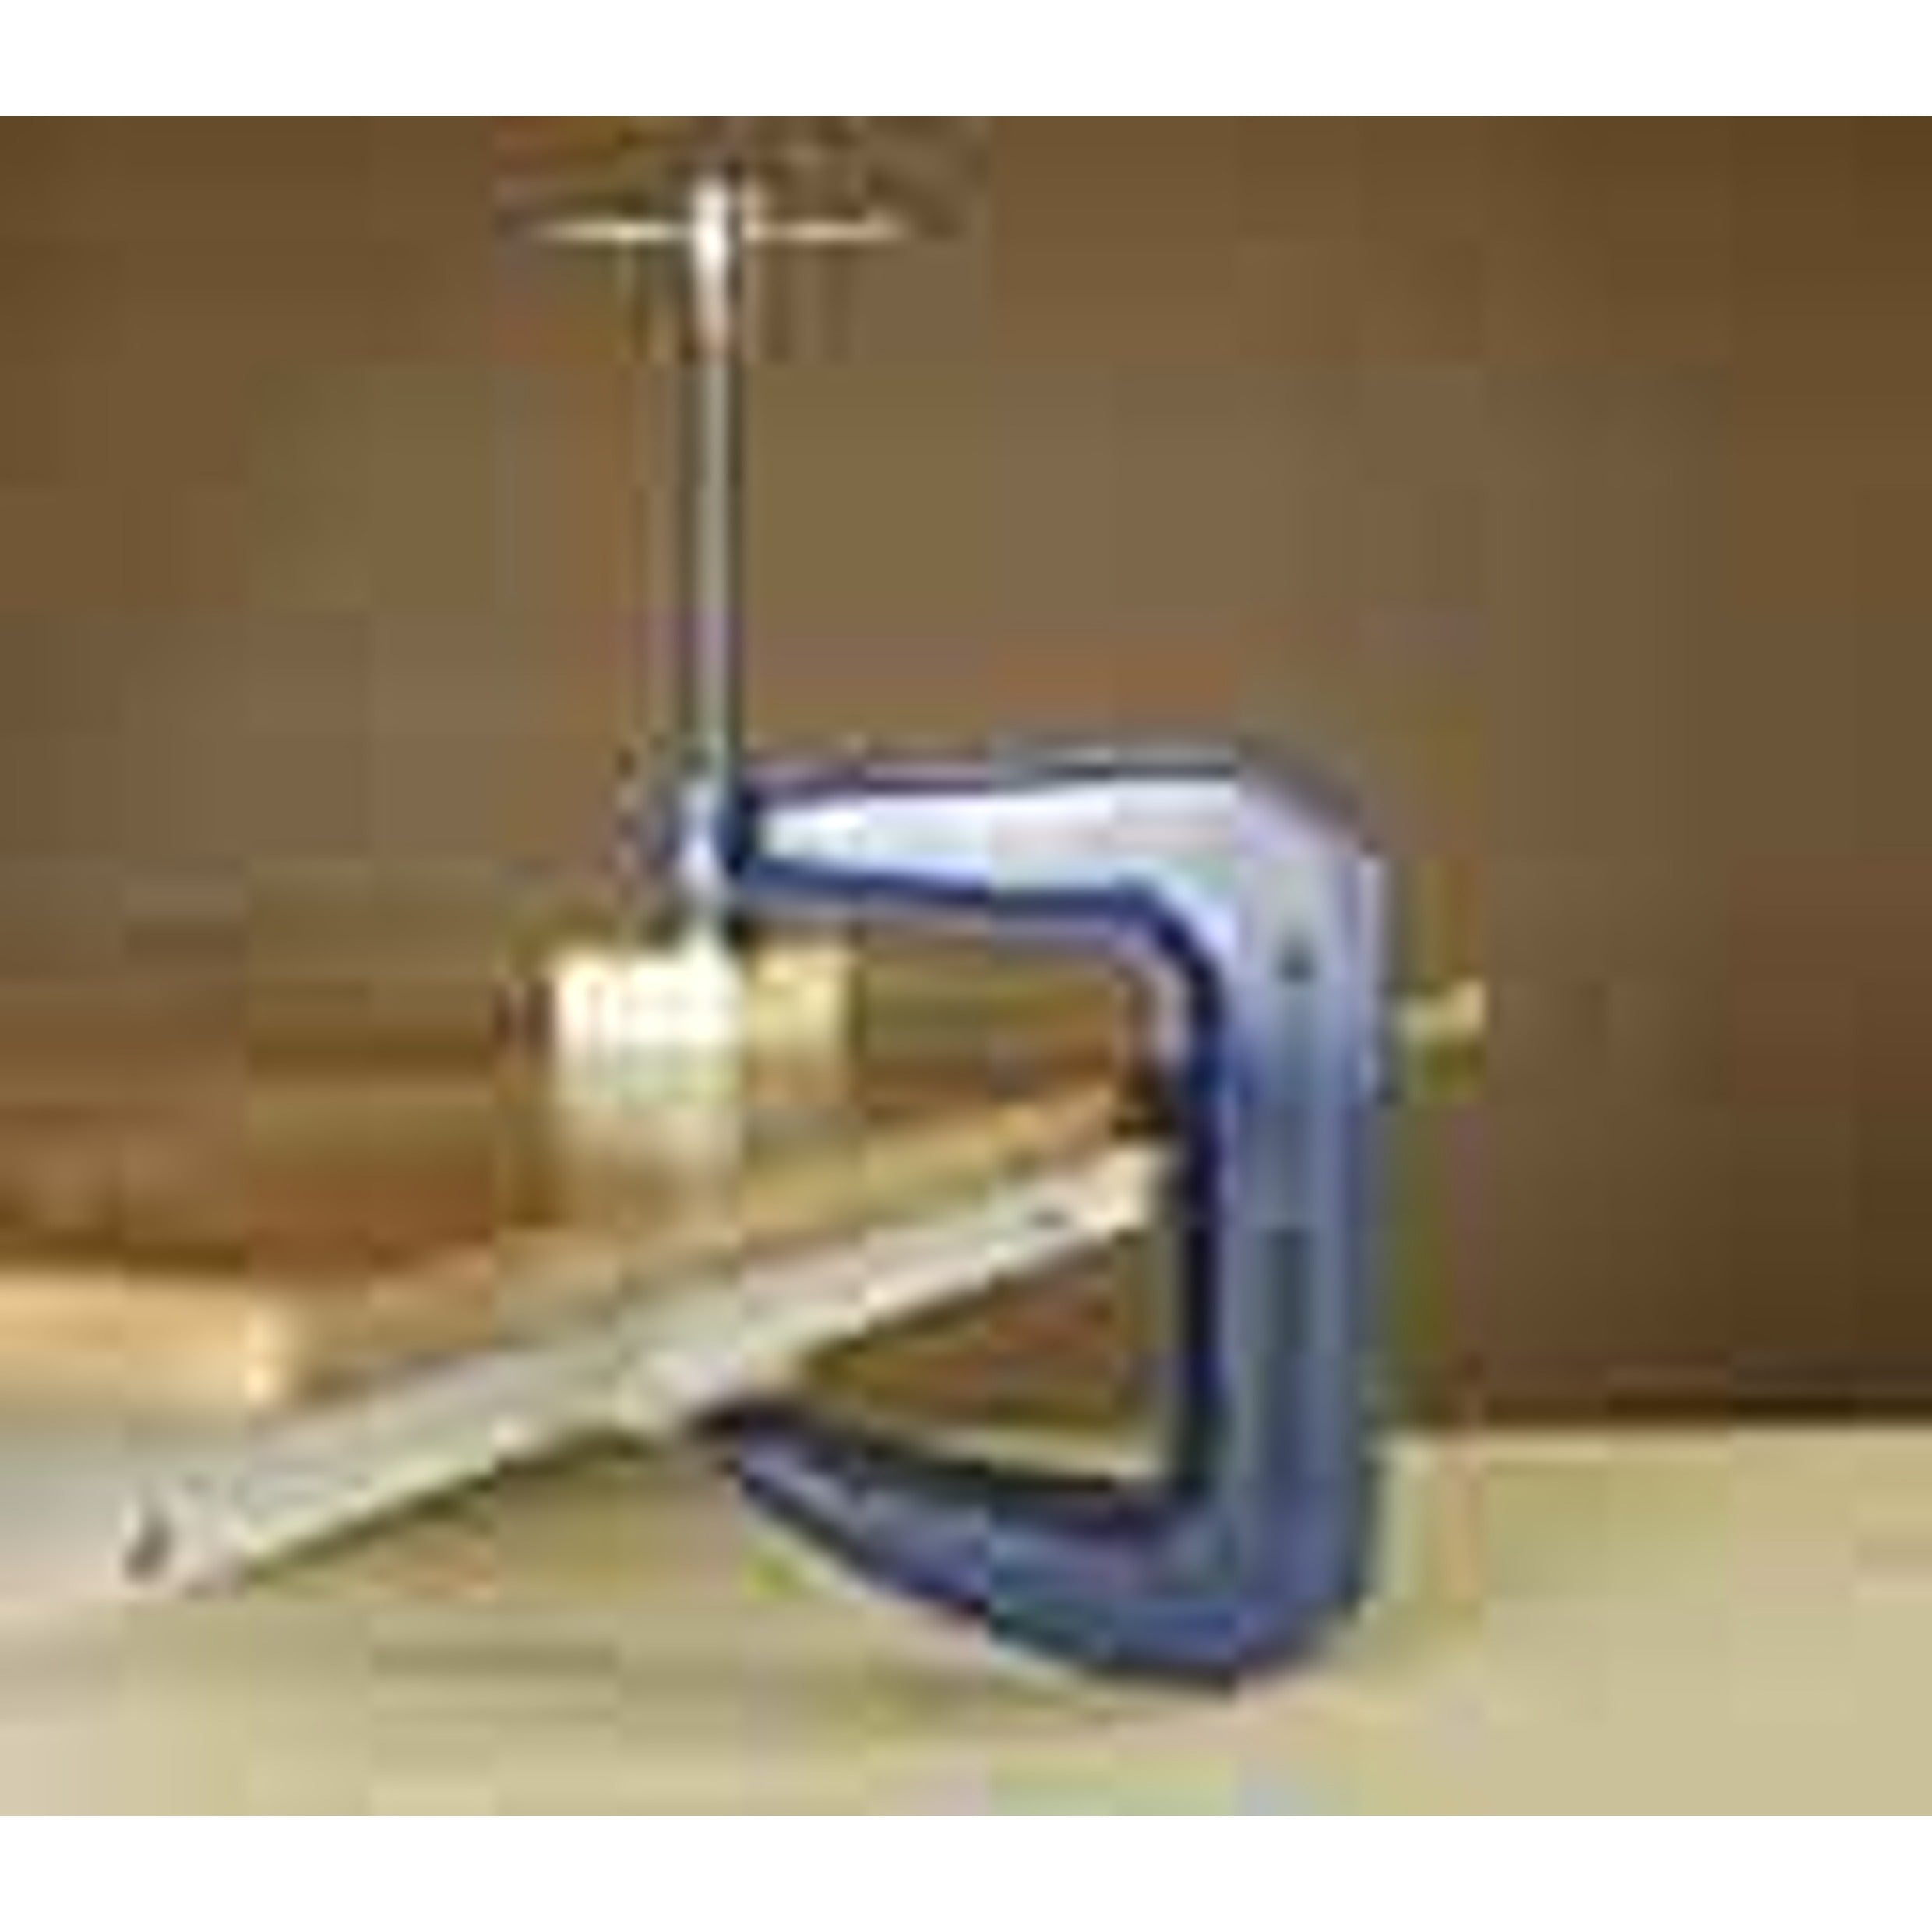 IRWIN T122/4 Deep Throat Duty G-Clamp Clamping Depth 100mm - Premium G-Clamp from IRWIN - Shop now at Yew Aik.